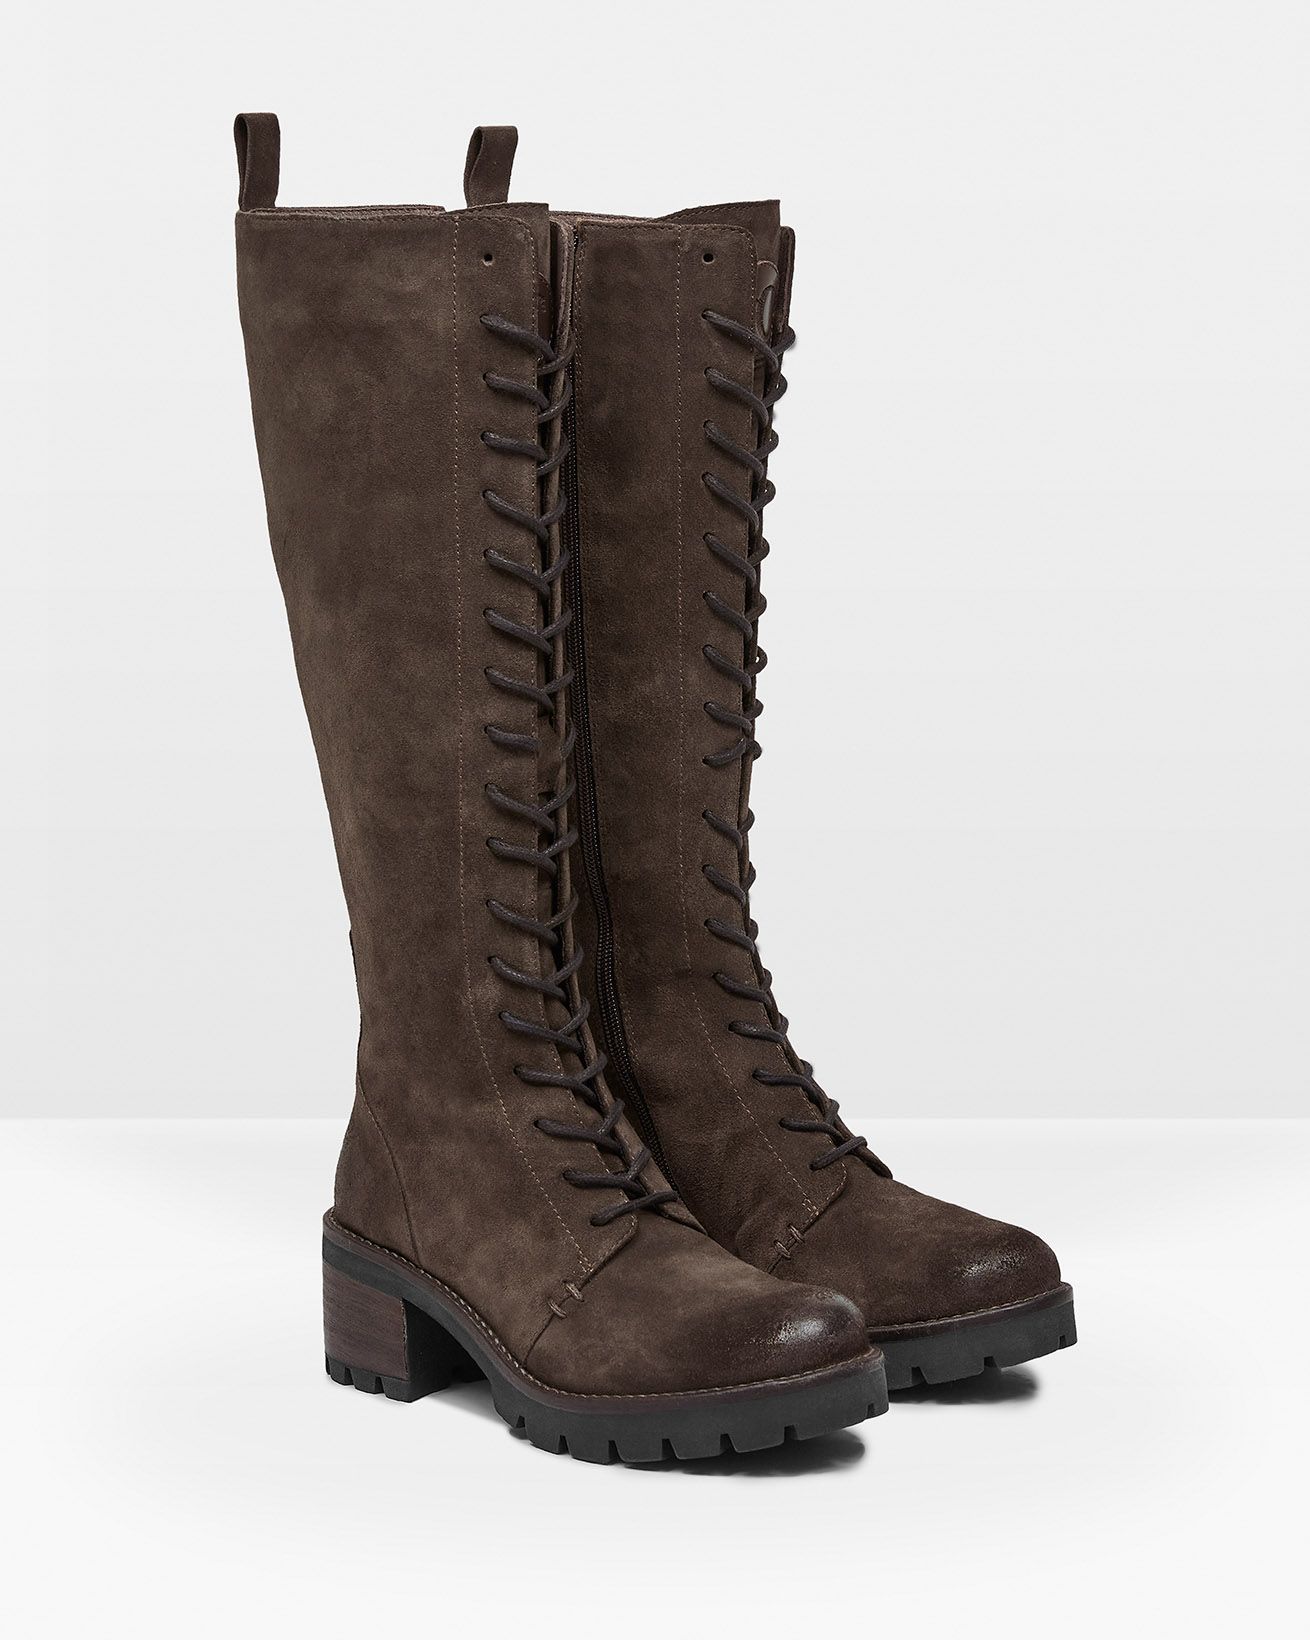 7843_lace-up-knee-boot_tanners-brown_lfs-2_web.jpg